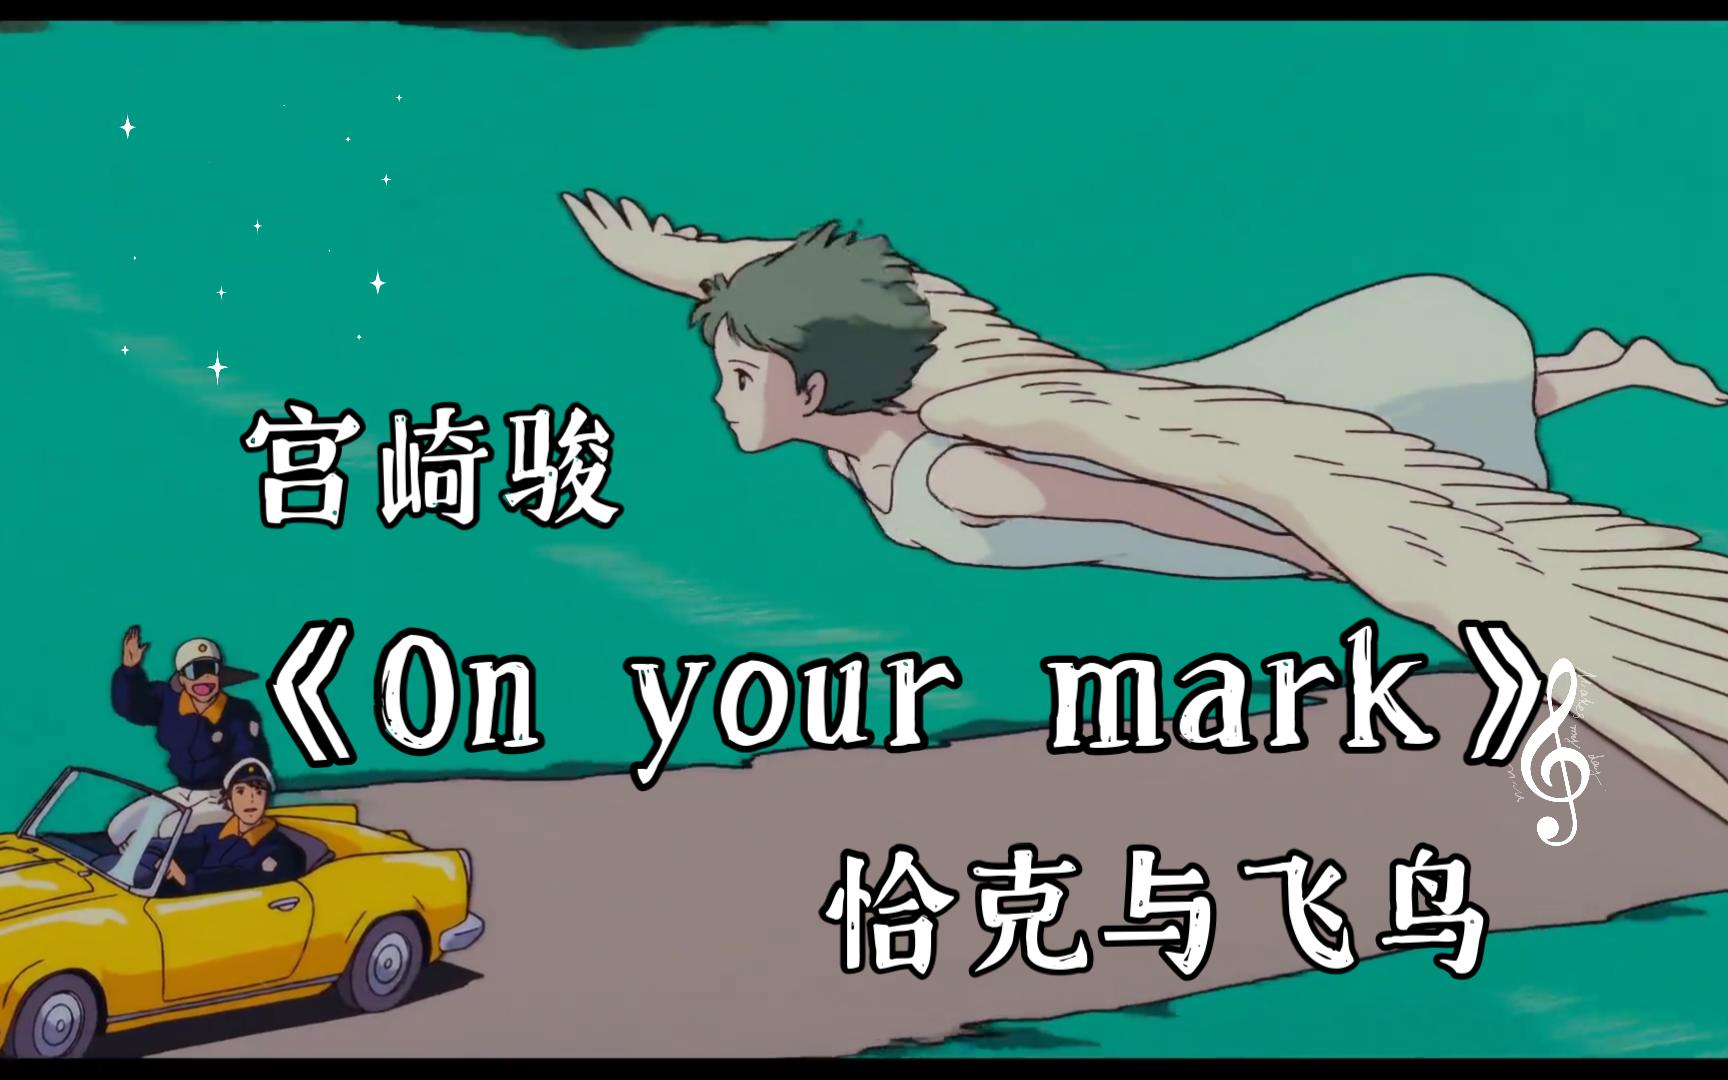 《on your mark》